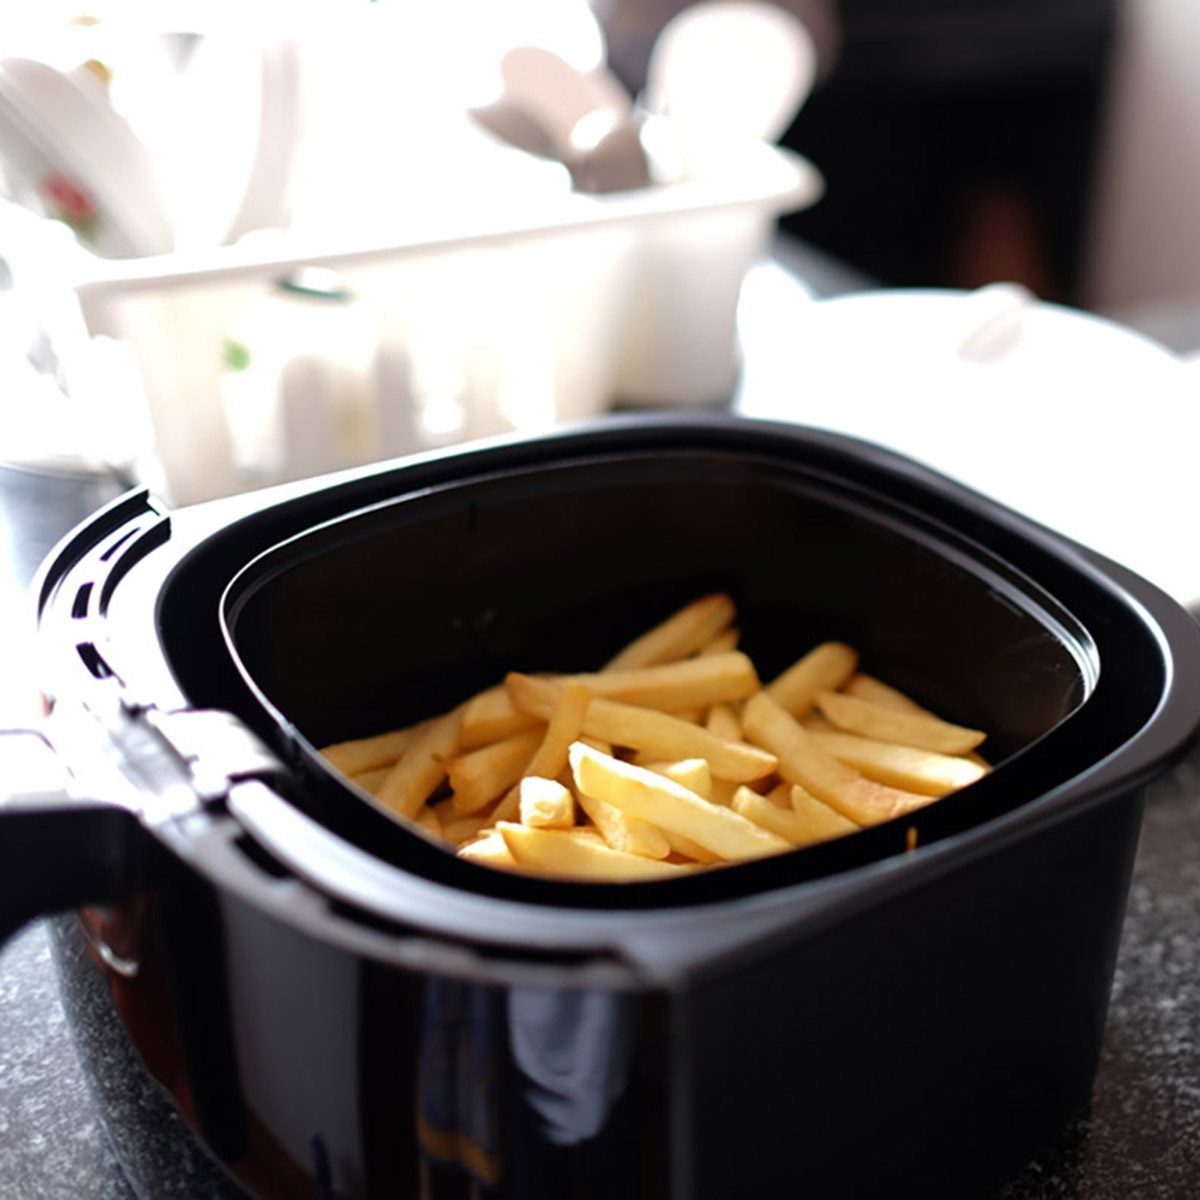 Home-made french fries in modern airfryer